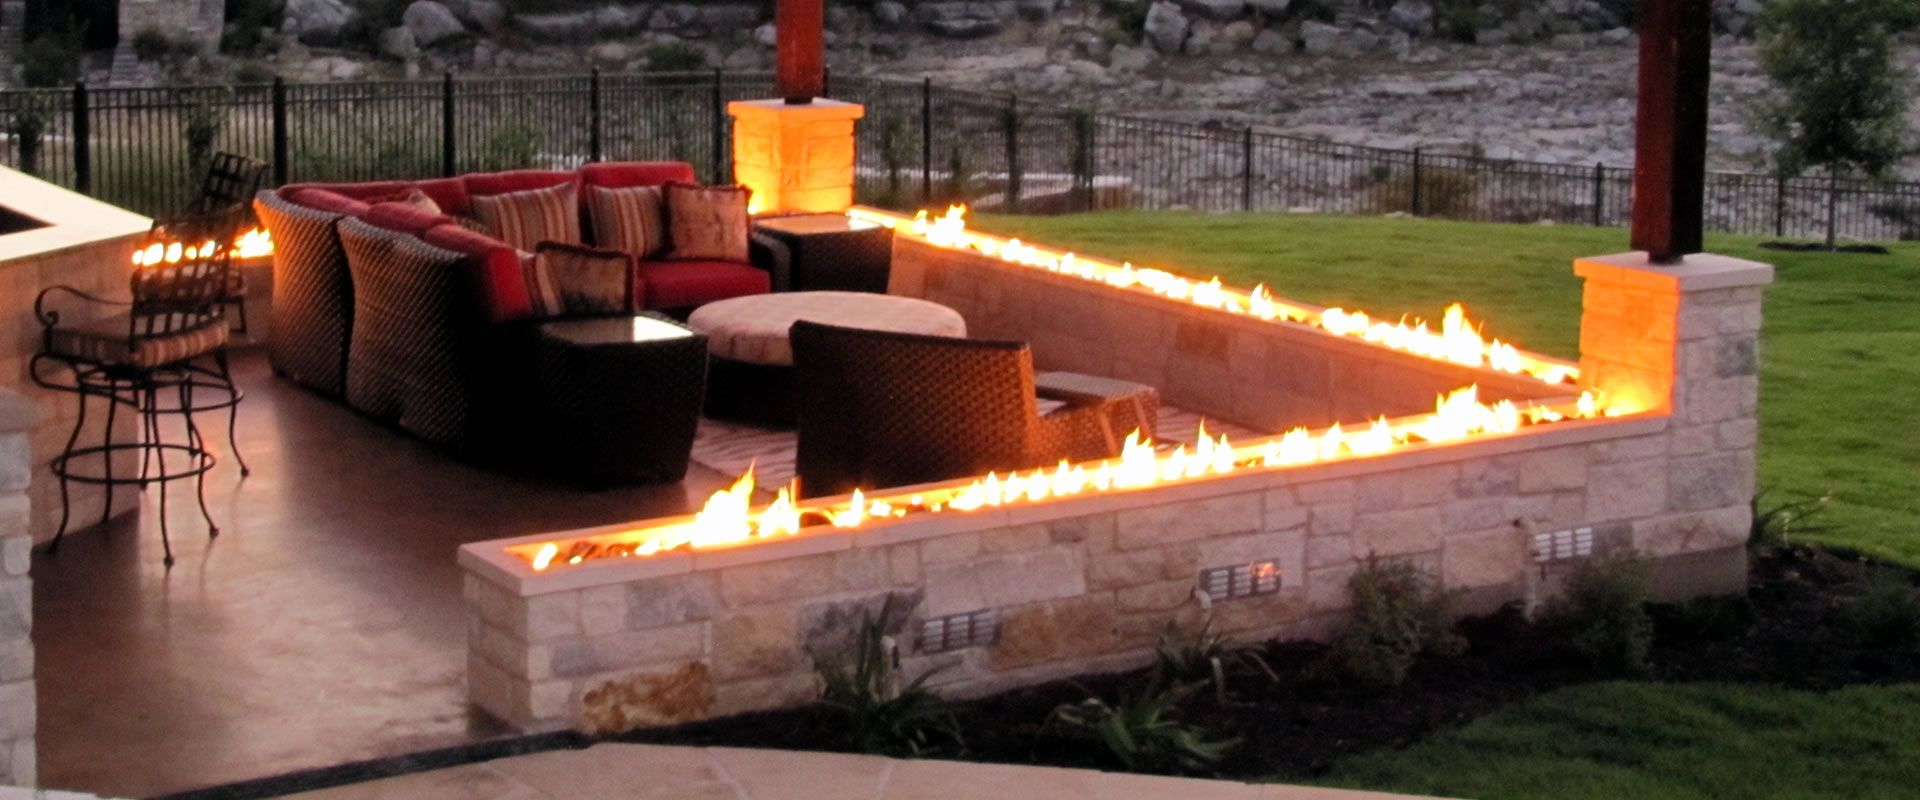 Fire Design Remote Control Module For Outdoor Firepits Outdoor regarding dimensions 1920 X 800